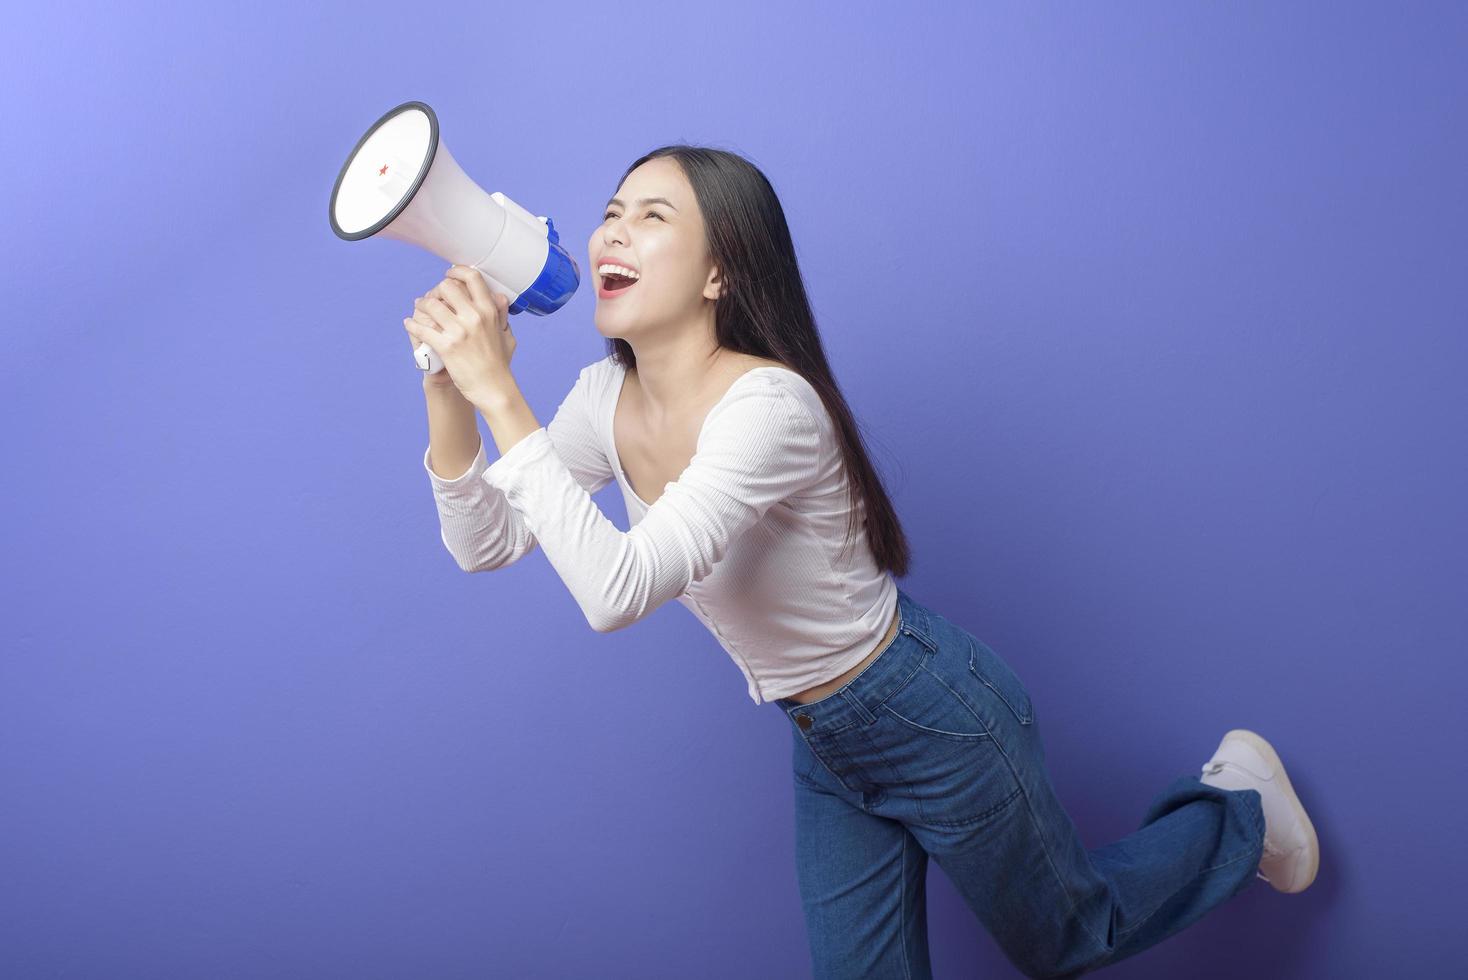 portrait of young beautiful smiling woman is using megaphone to announce over isolated purple background studio photo